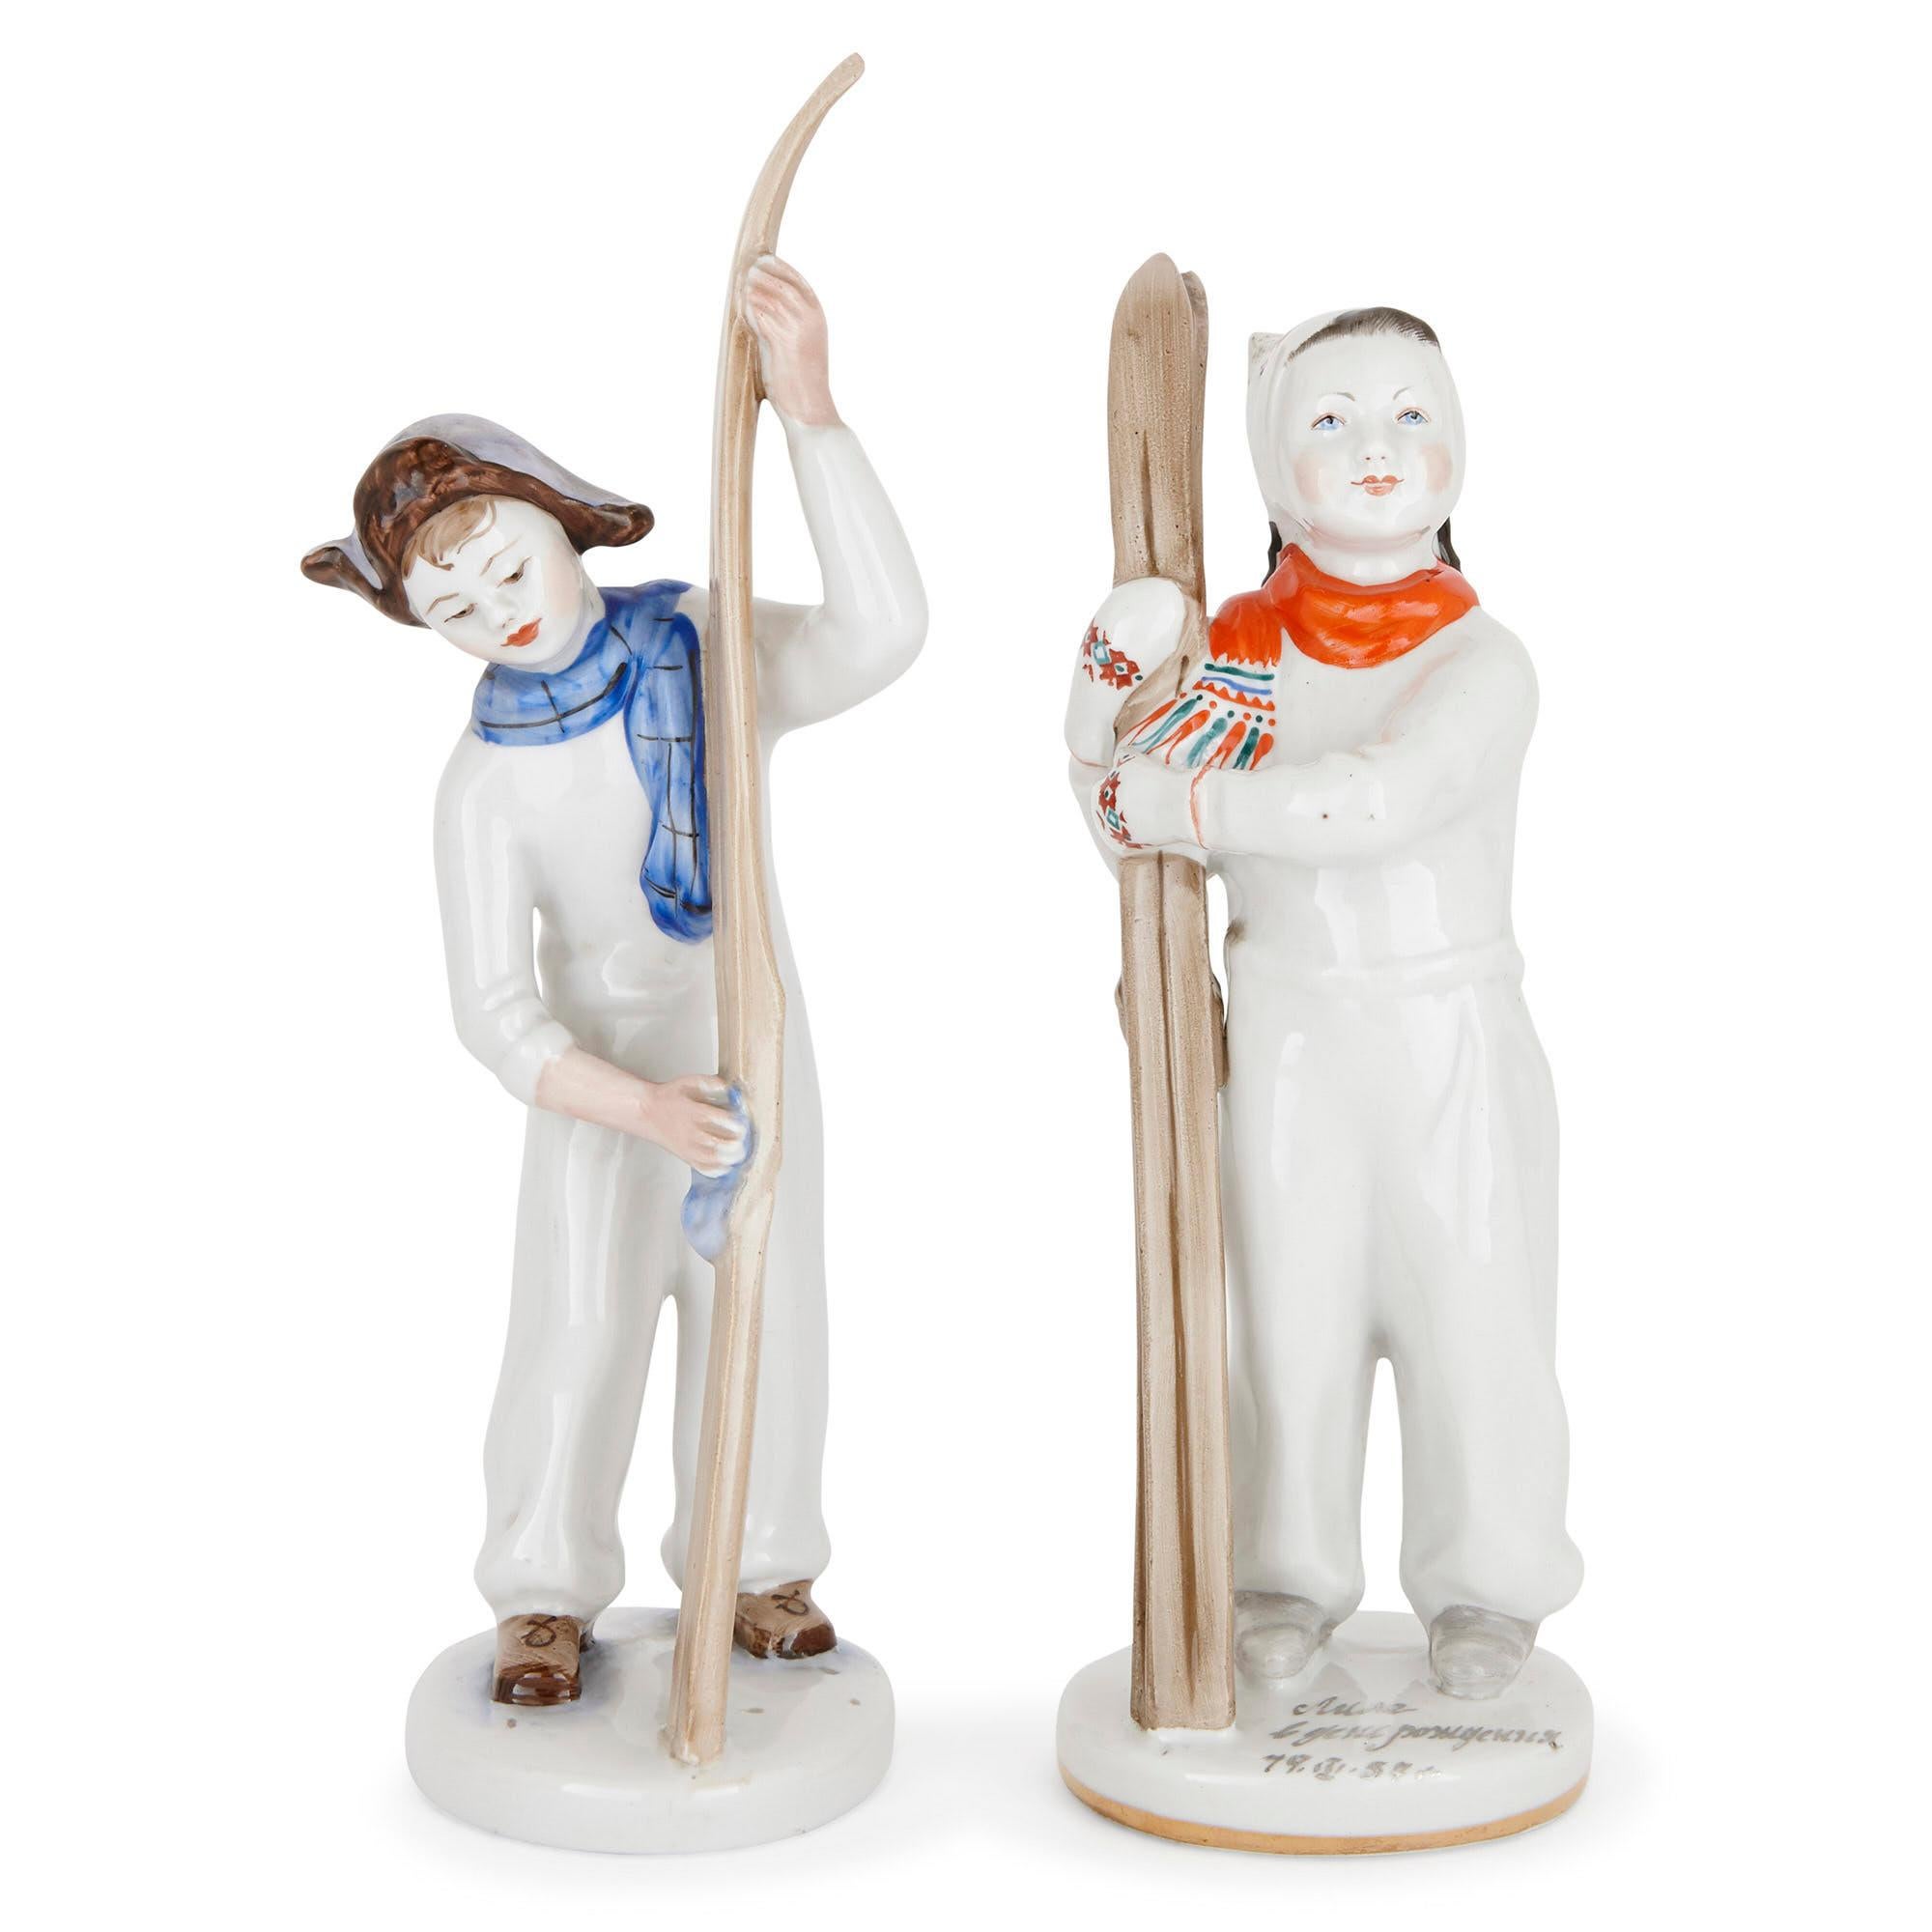 These delightful porcelain figurines were created in Russia in the 1950s. Included in this set are two models depicting a boy and girl holding skis, and a small figure of a boy playing ice hockey. These three figurines are marked on their undersides